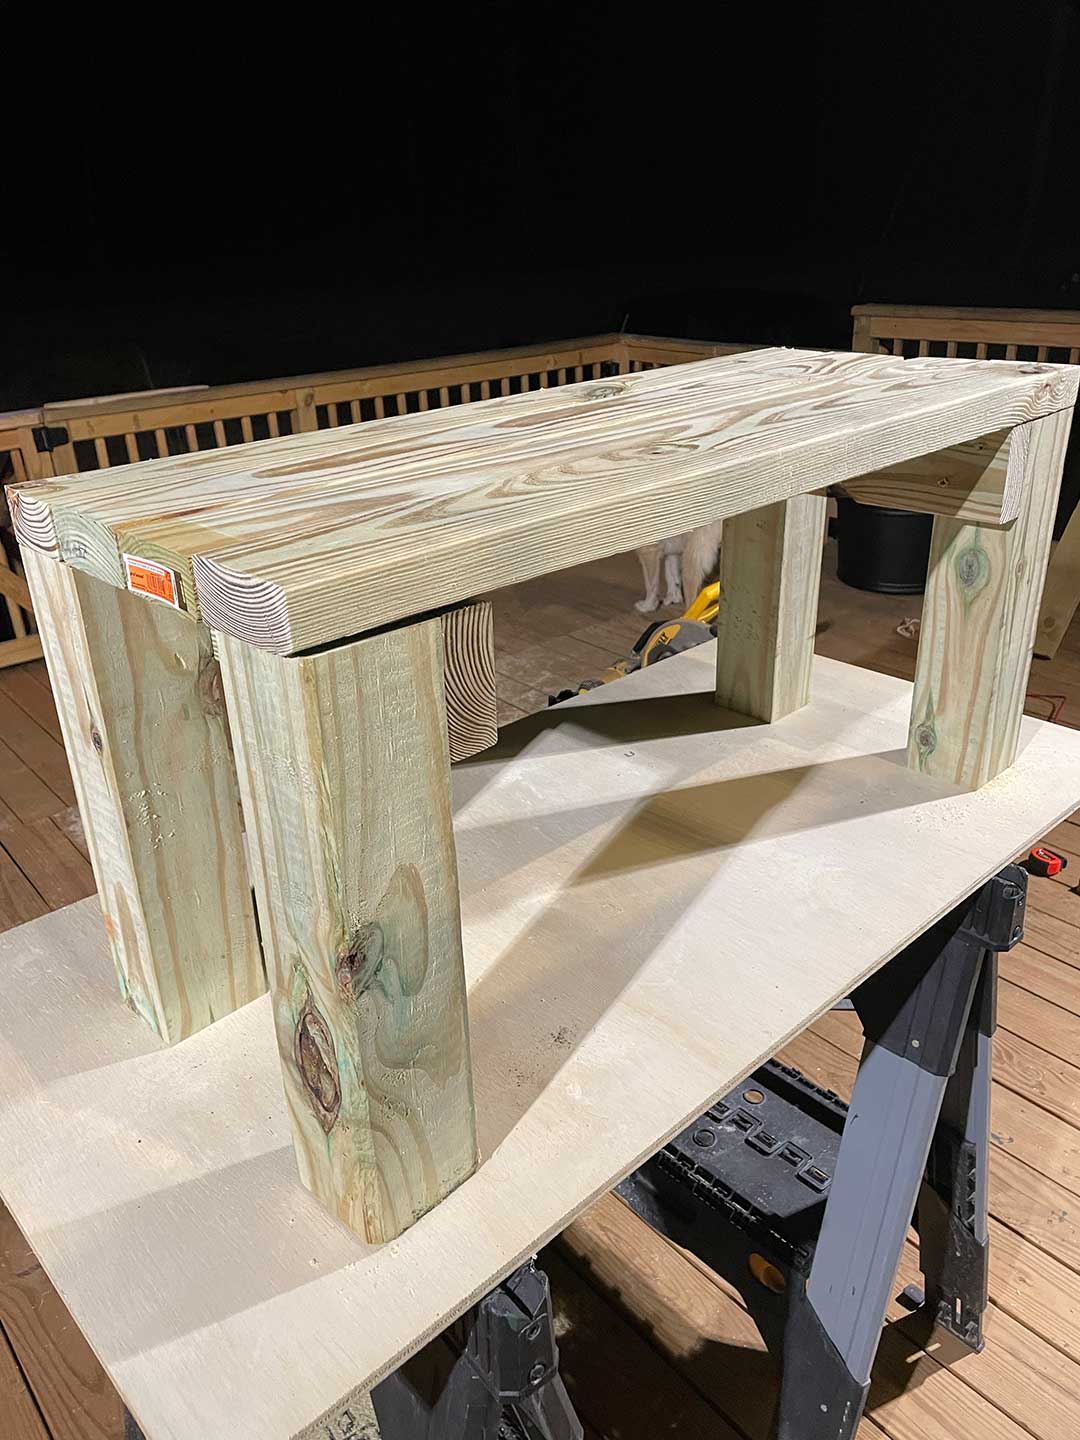 Unstained wood assembled to form a table.